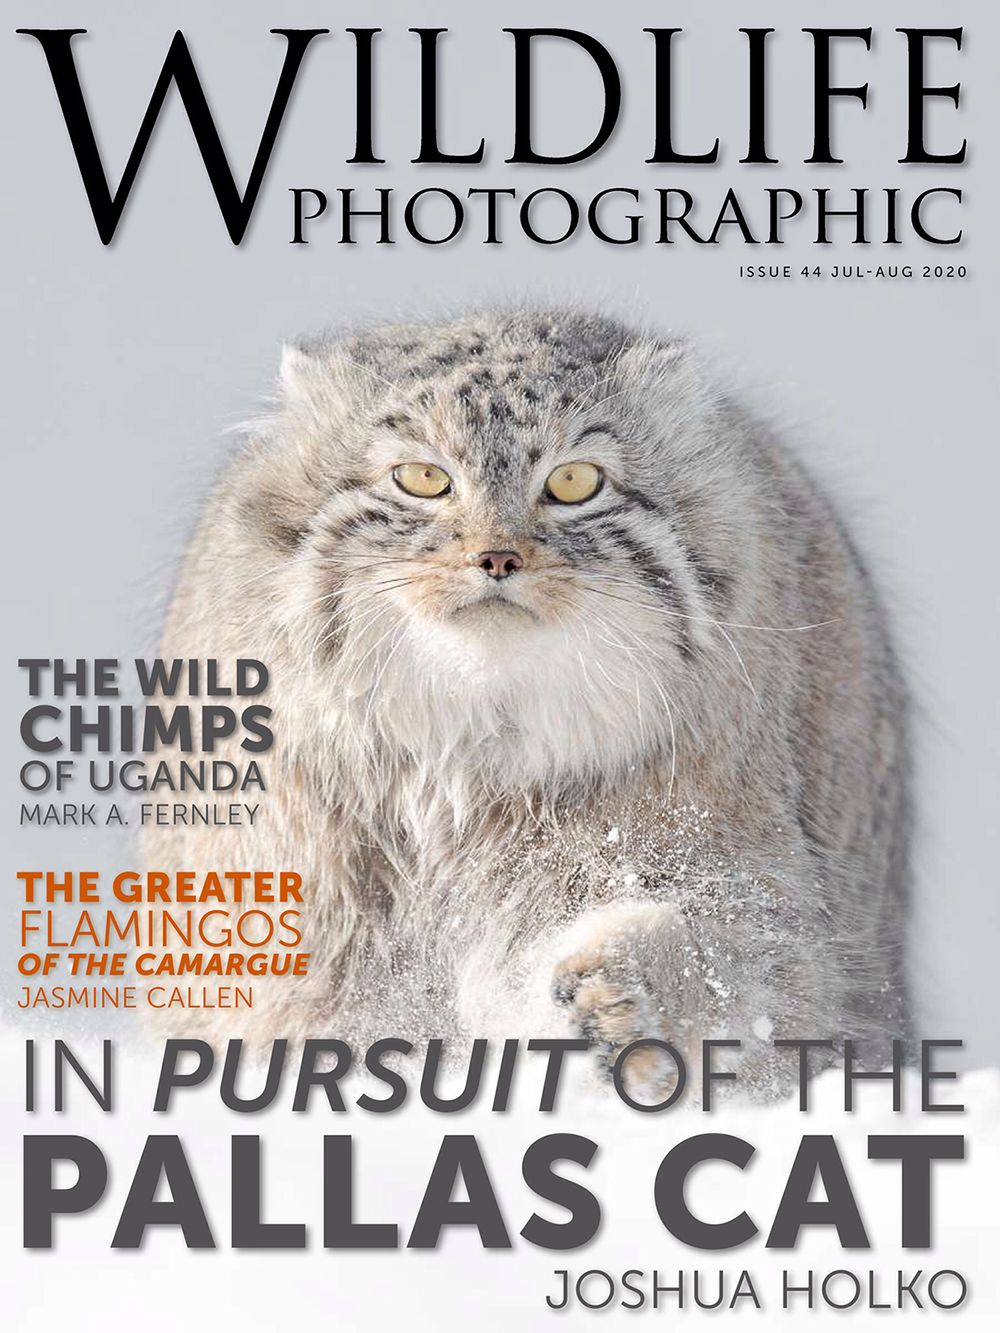 Cover photograph by Joshua Holko